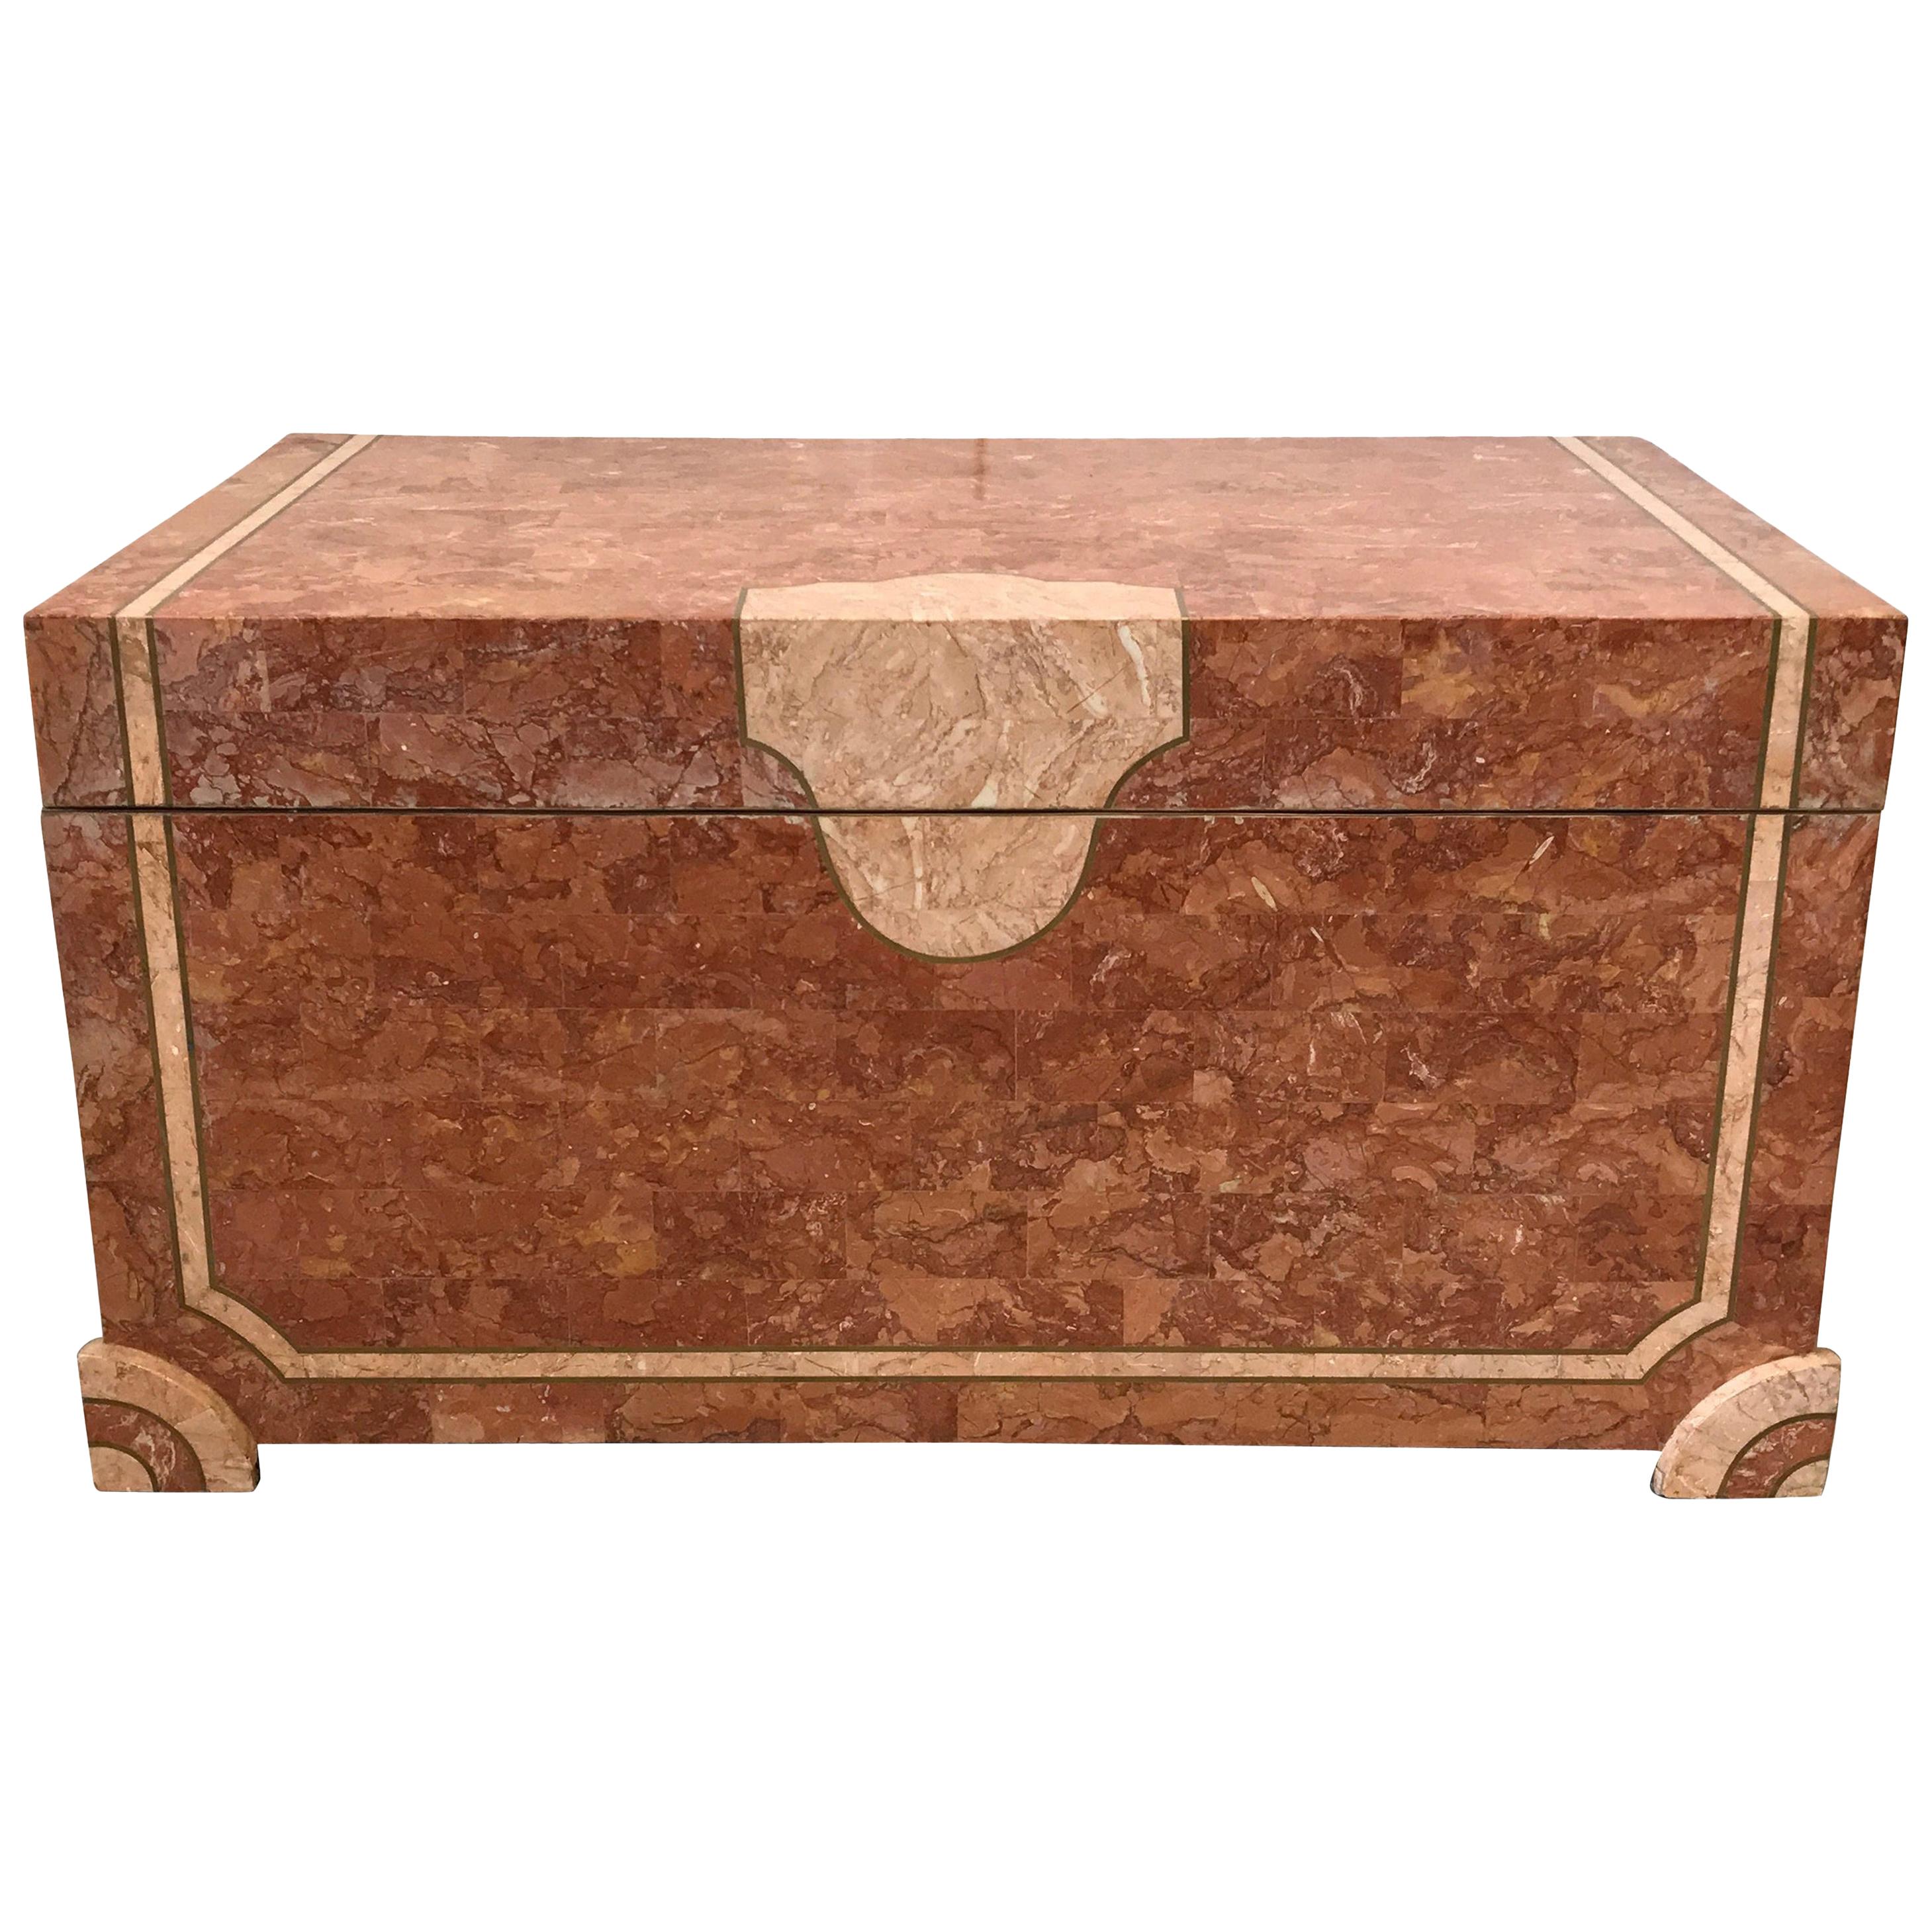 Robert Marcius for Casa Bique Tesselated Stone Trunk Coffee Table, 1980s For Sale